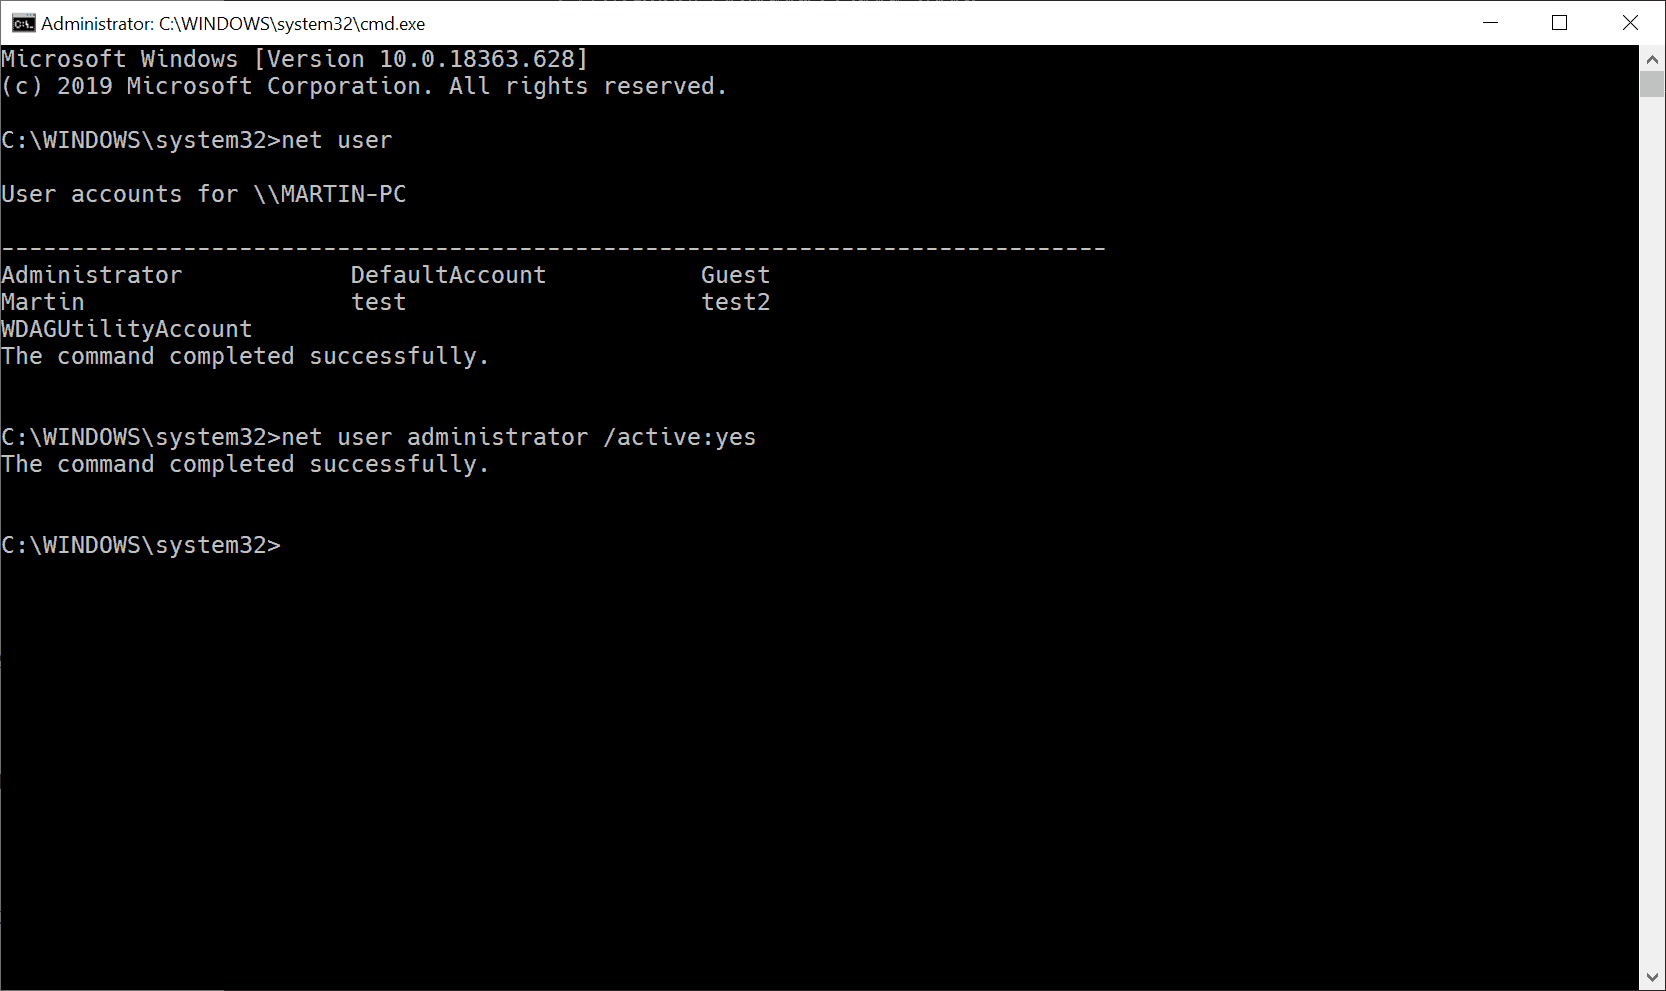 Open the Command Prompt as an administrator by pressing Win + X and selecting "Command Prompt (Admin)" from the menu.
Type sfc /scannow and press Enter to start the System File Checker scan.